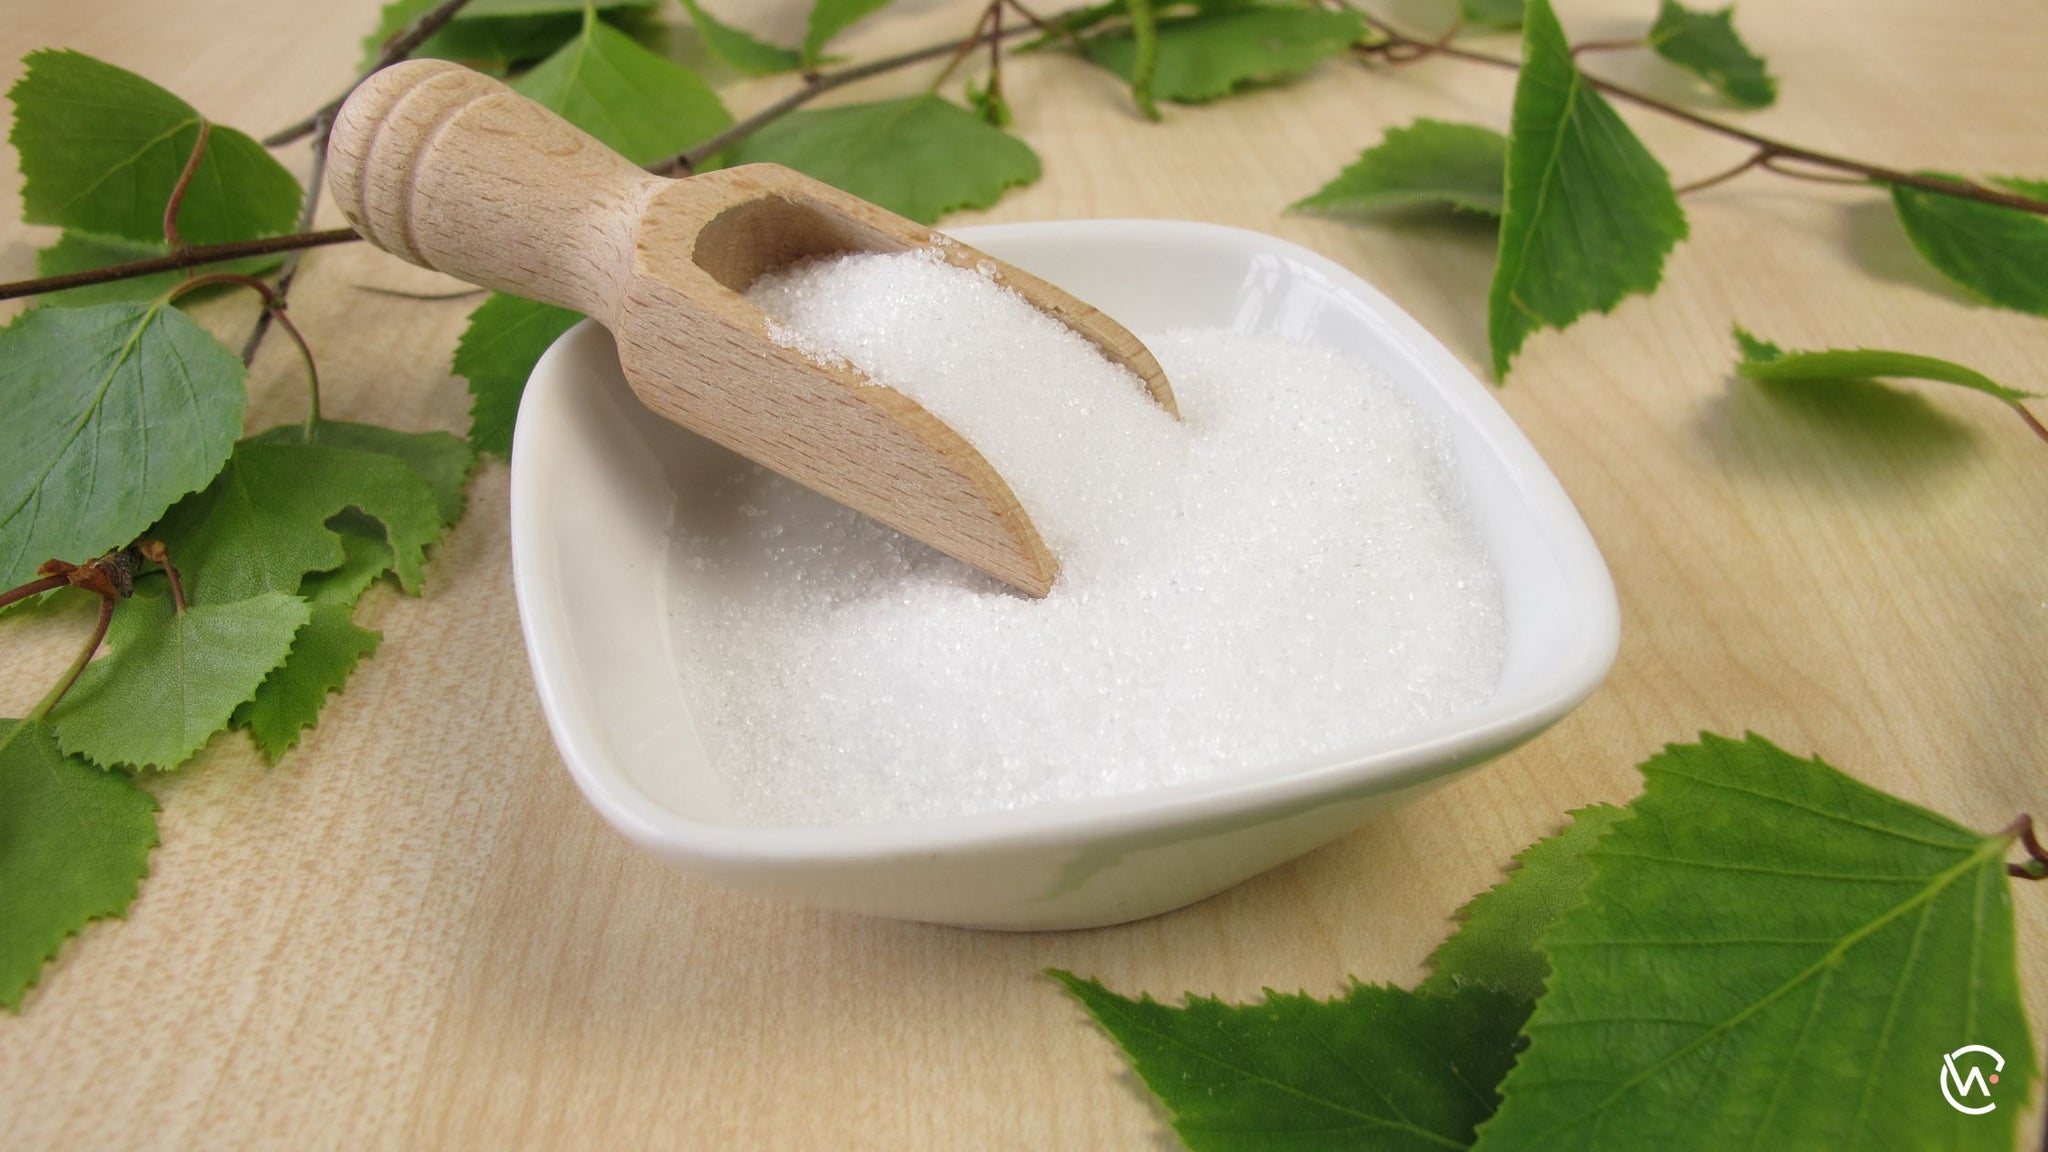 Are Sweeteners Bad For You?